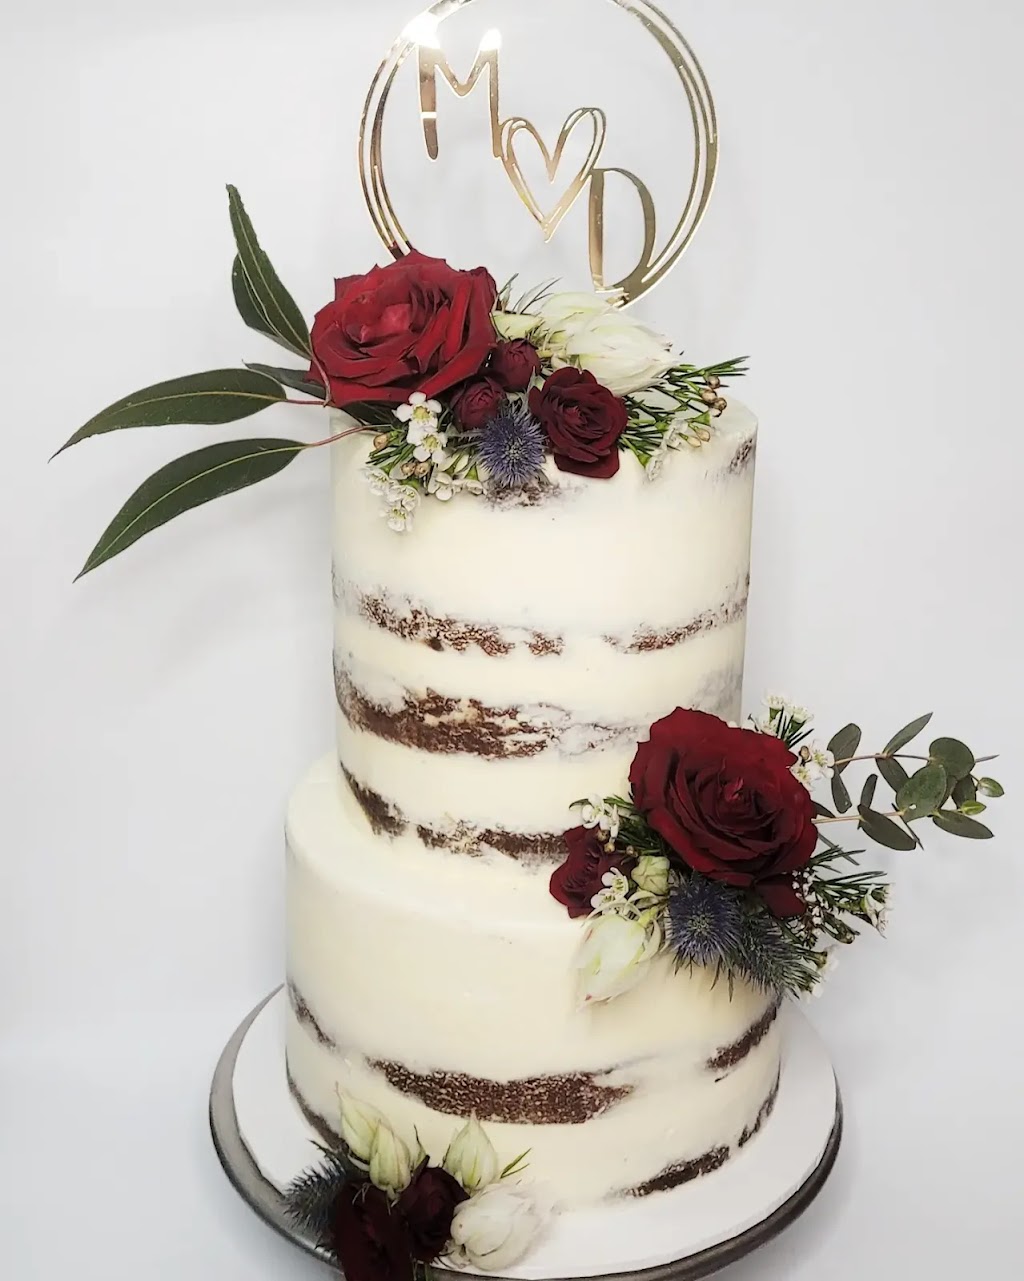 Sweet Creations by Amy | bakery | 14 Clancy St, East Innisfail QLD 4860, Australia | 0404107580 OR +61 404 107 580